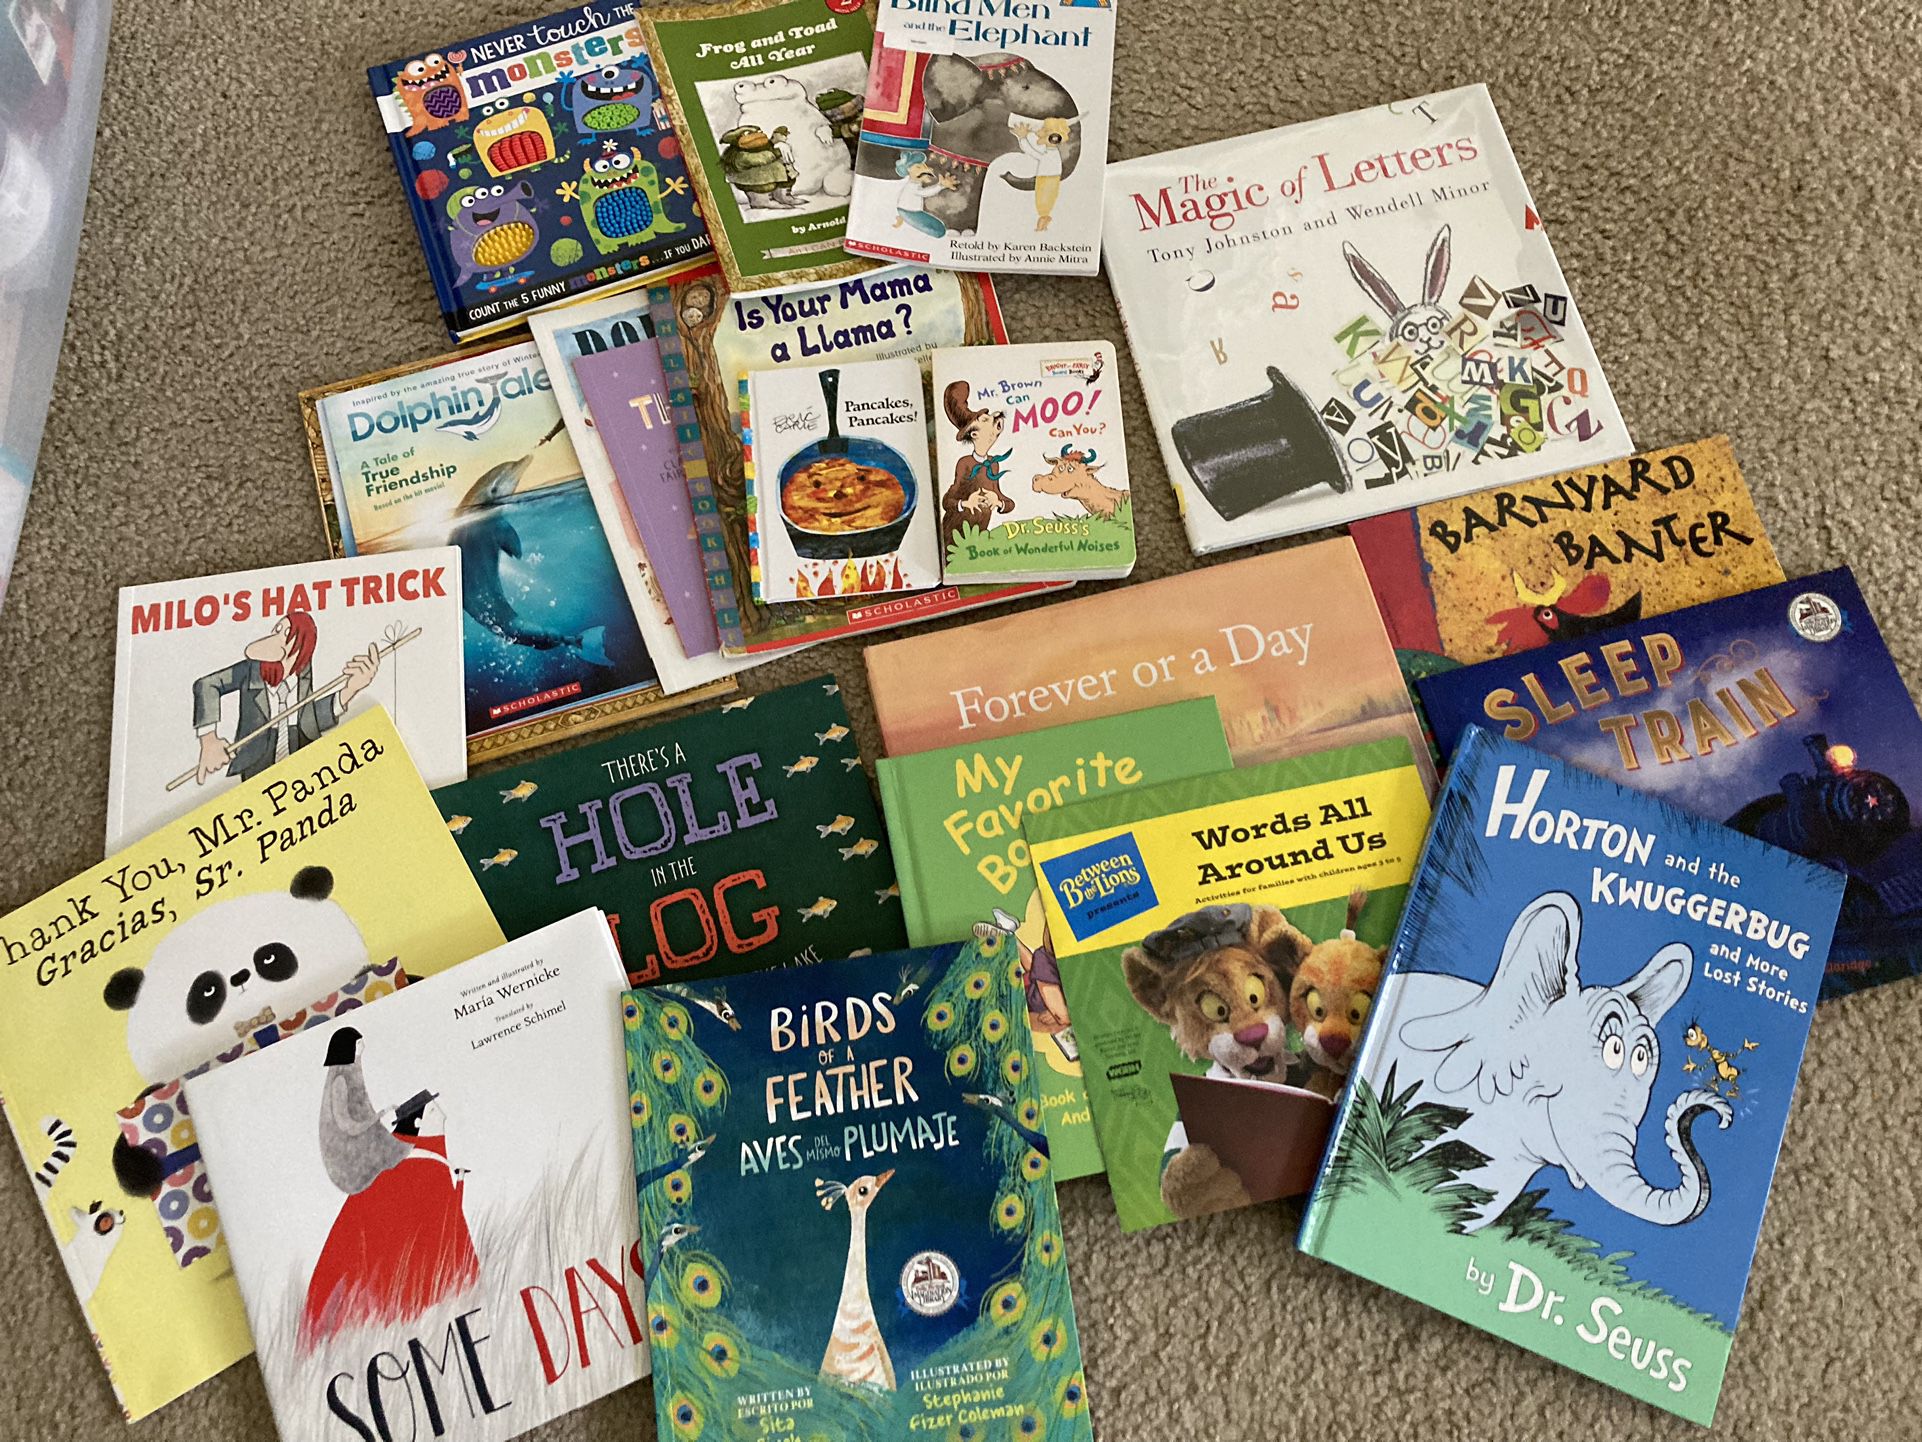 Kids Books 23 Total - More Items Listed On My Page